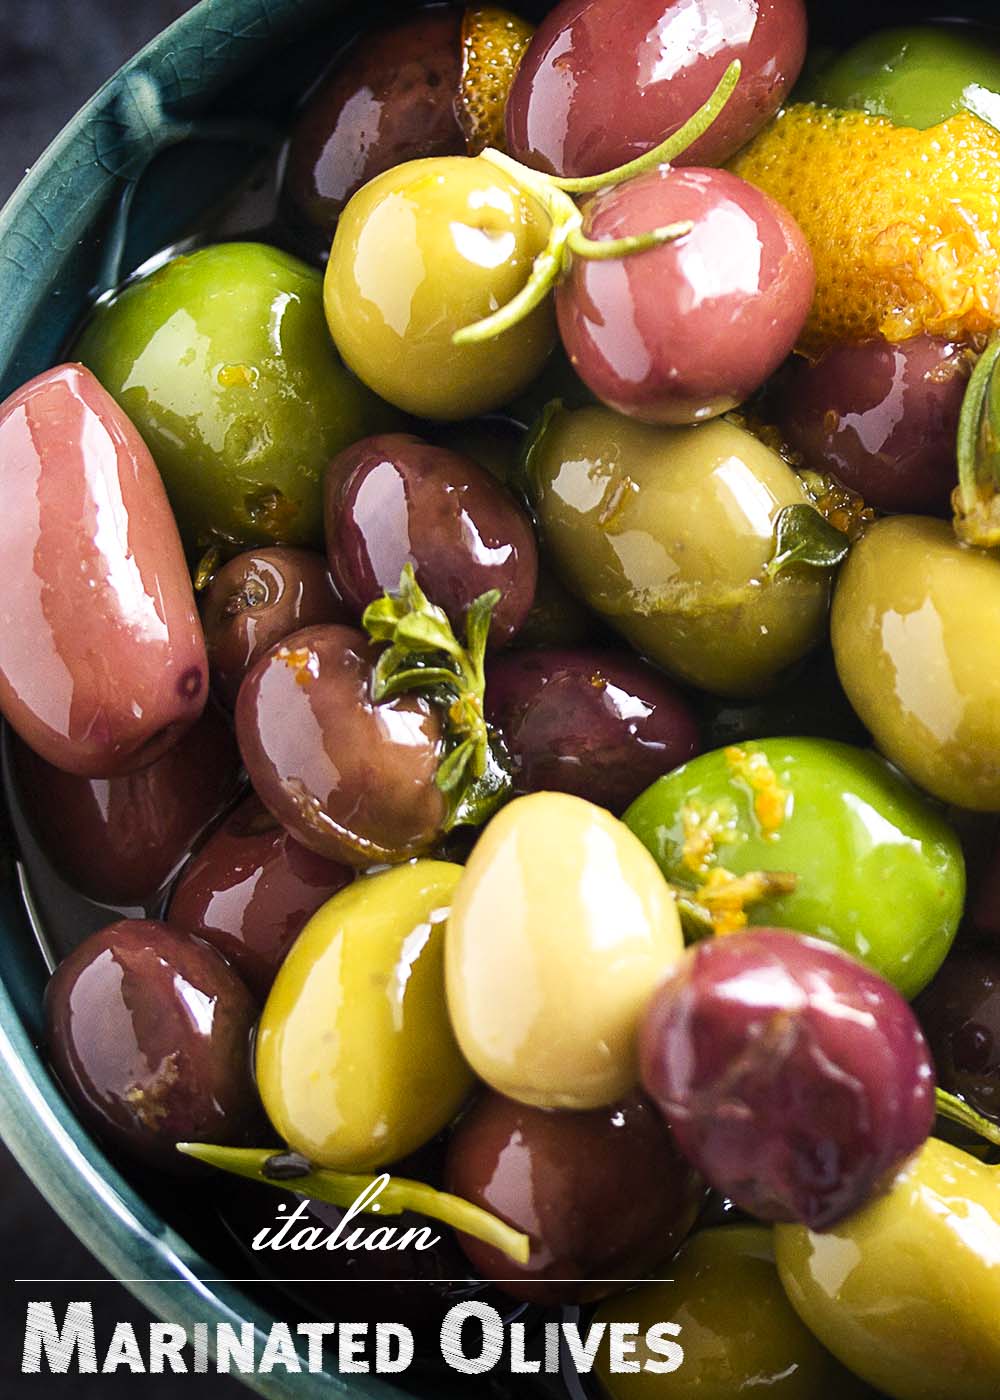 Italian marinated olives are an easy party appetizer of mixed olives, citrus, and herbs which takes only a few minutes to put together. | justalittlebitofbacon.com